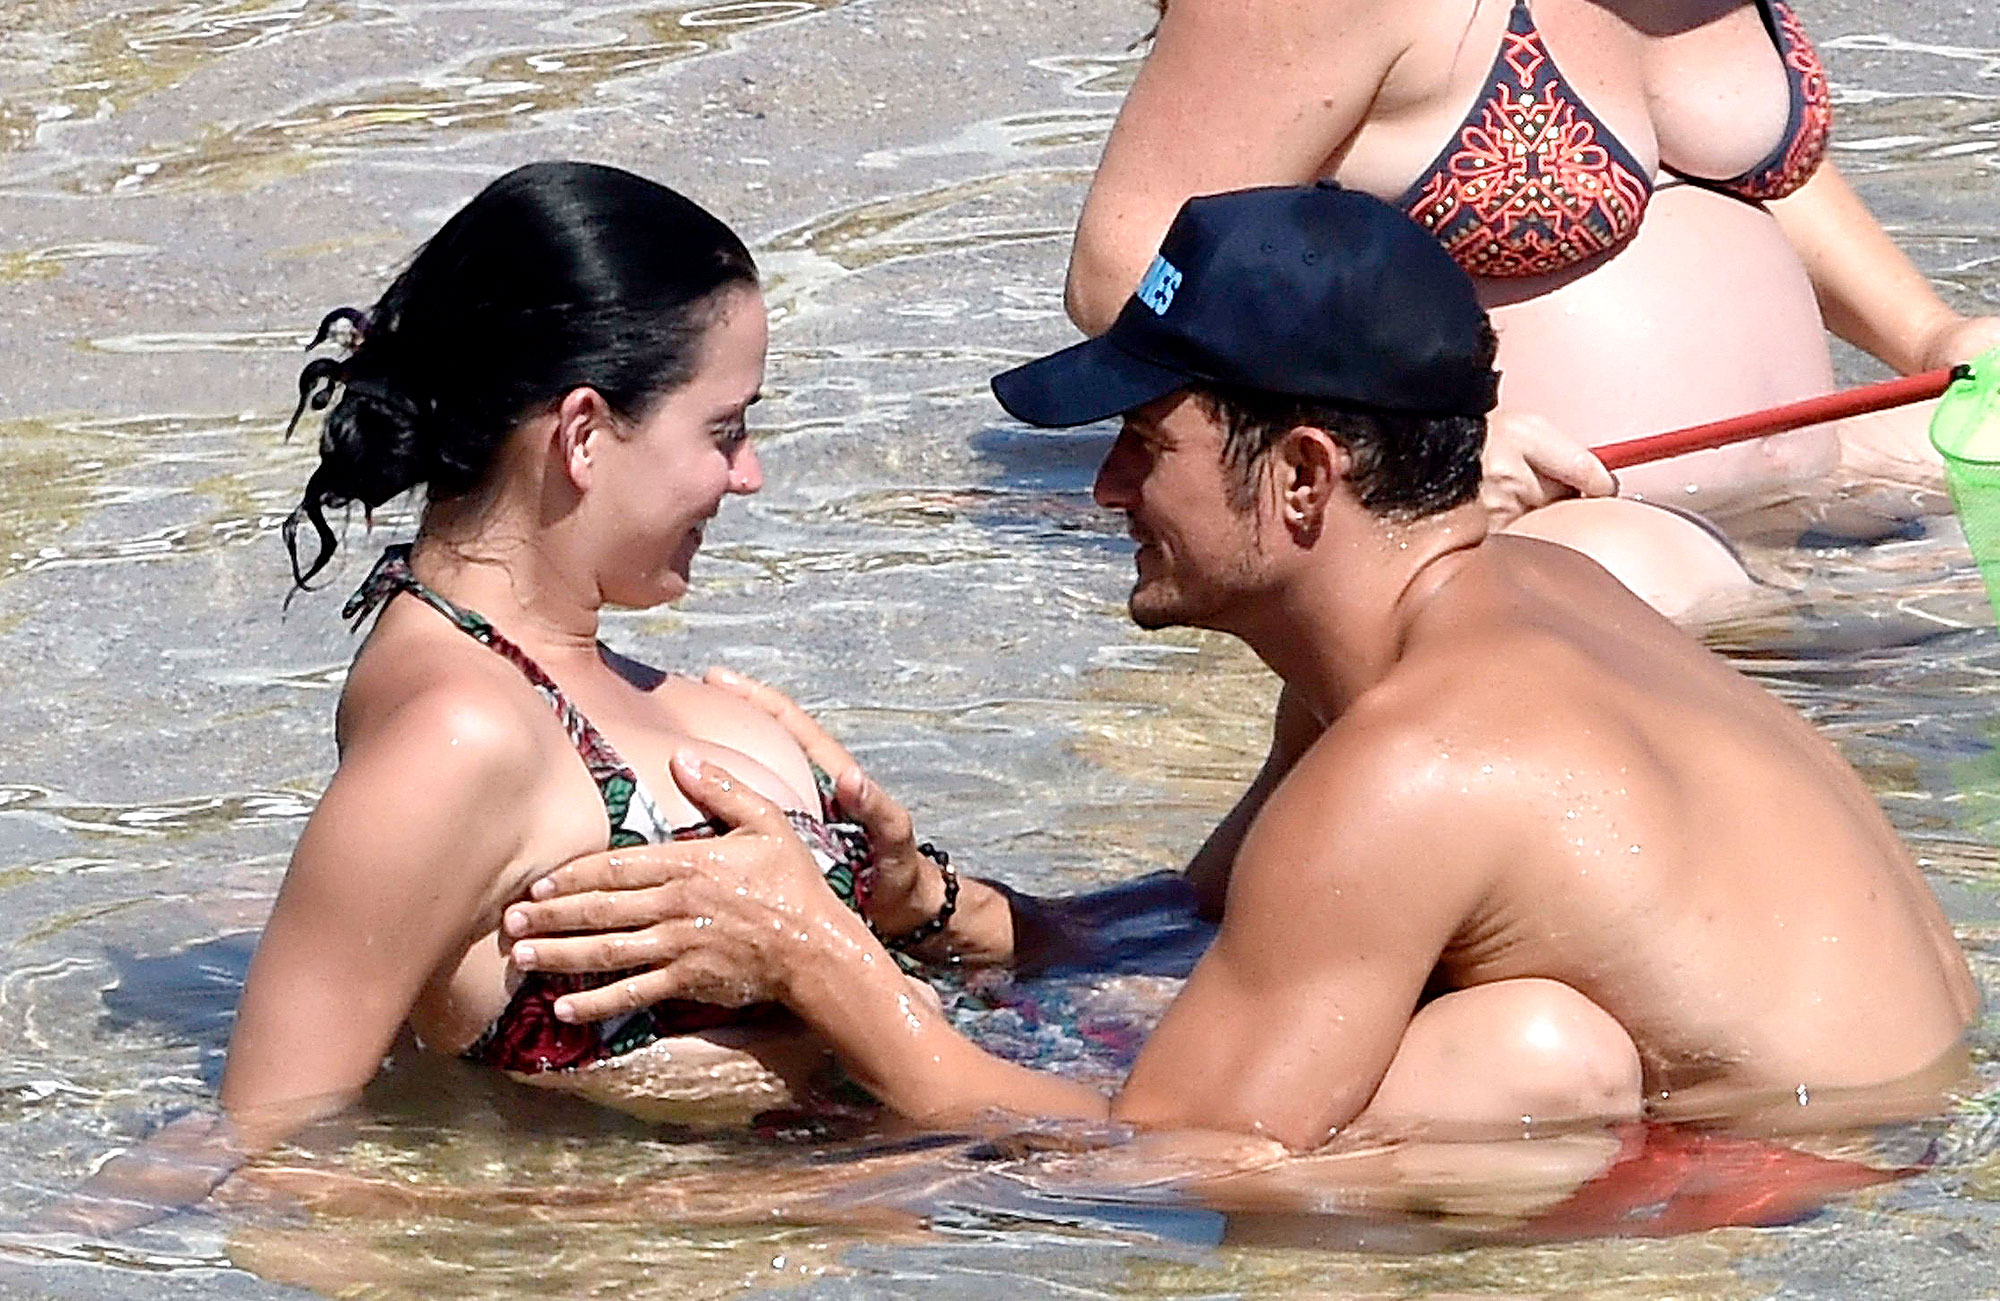 Naked Swimming Tits - Orlando Bloom Grabs Katy Perry's Boobs During Beach Vacation